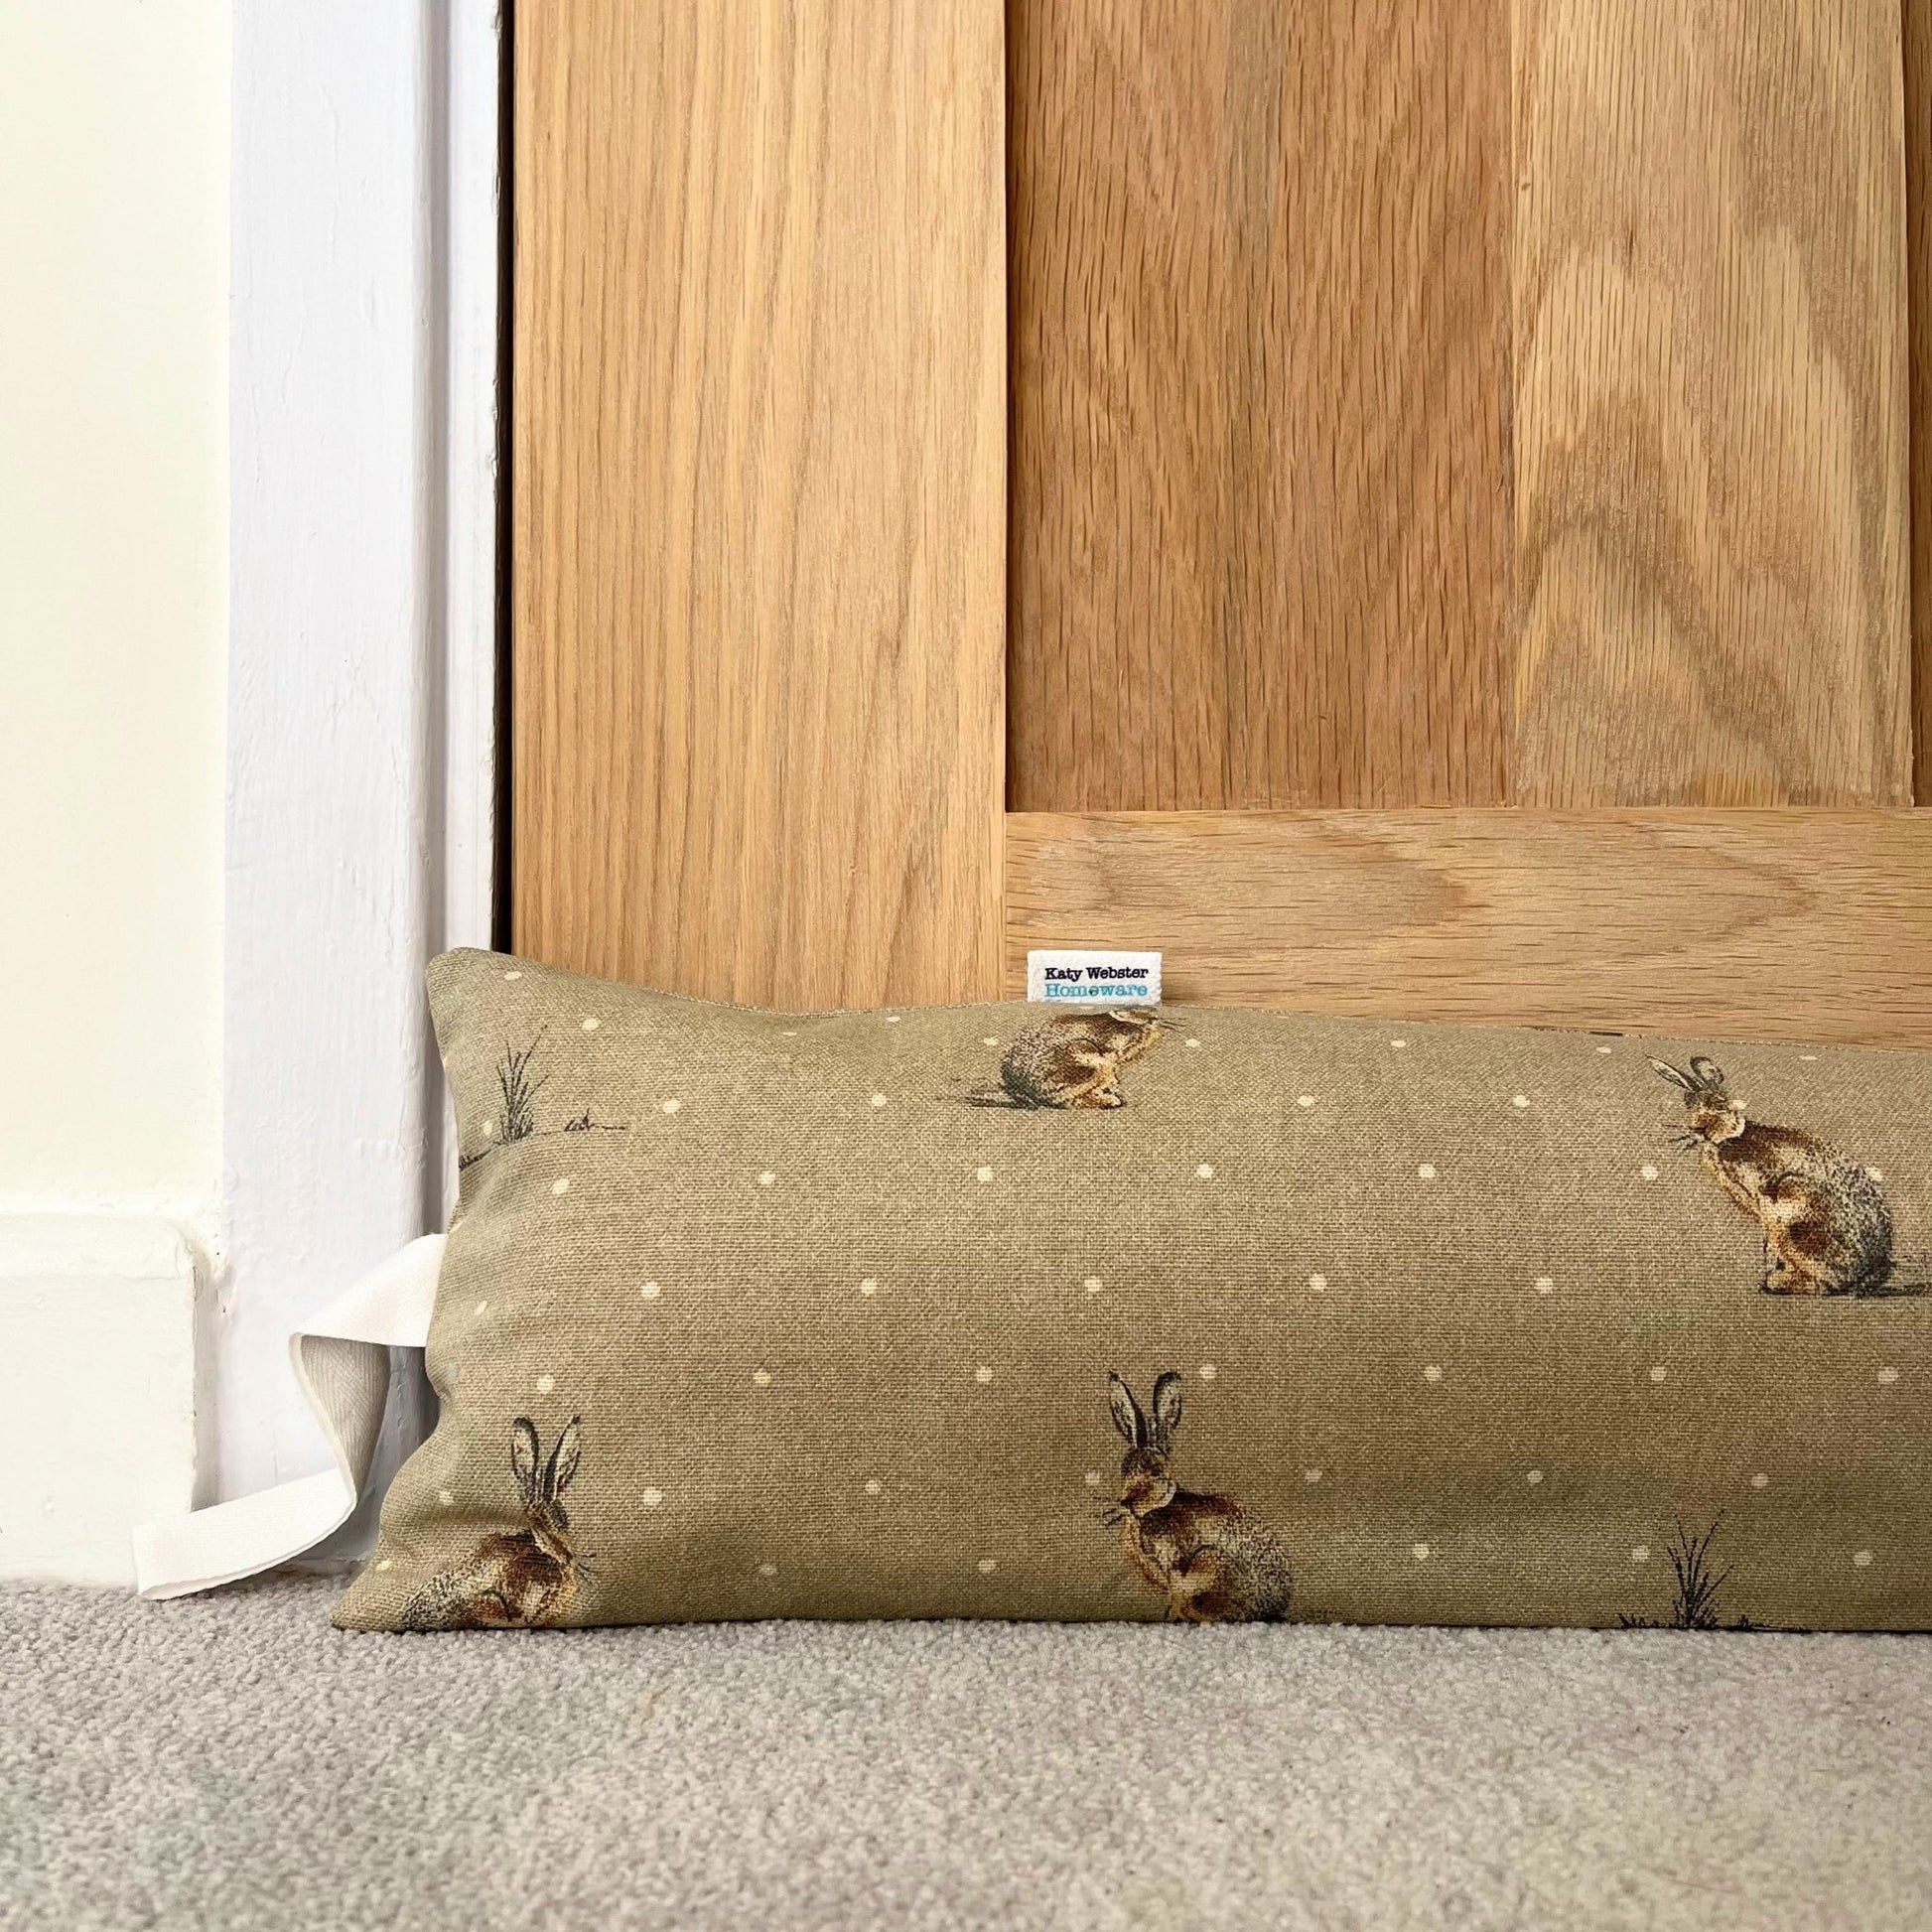 Hartley Hare Weighted Draught Excluder - katywebsterhomeware